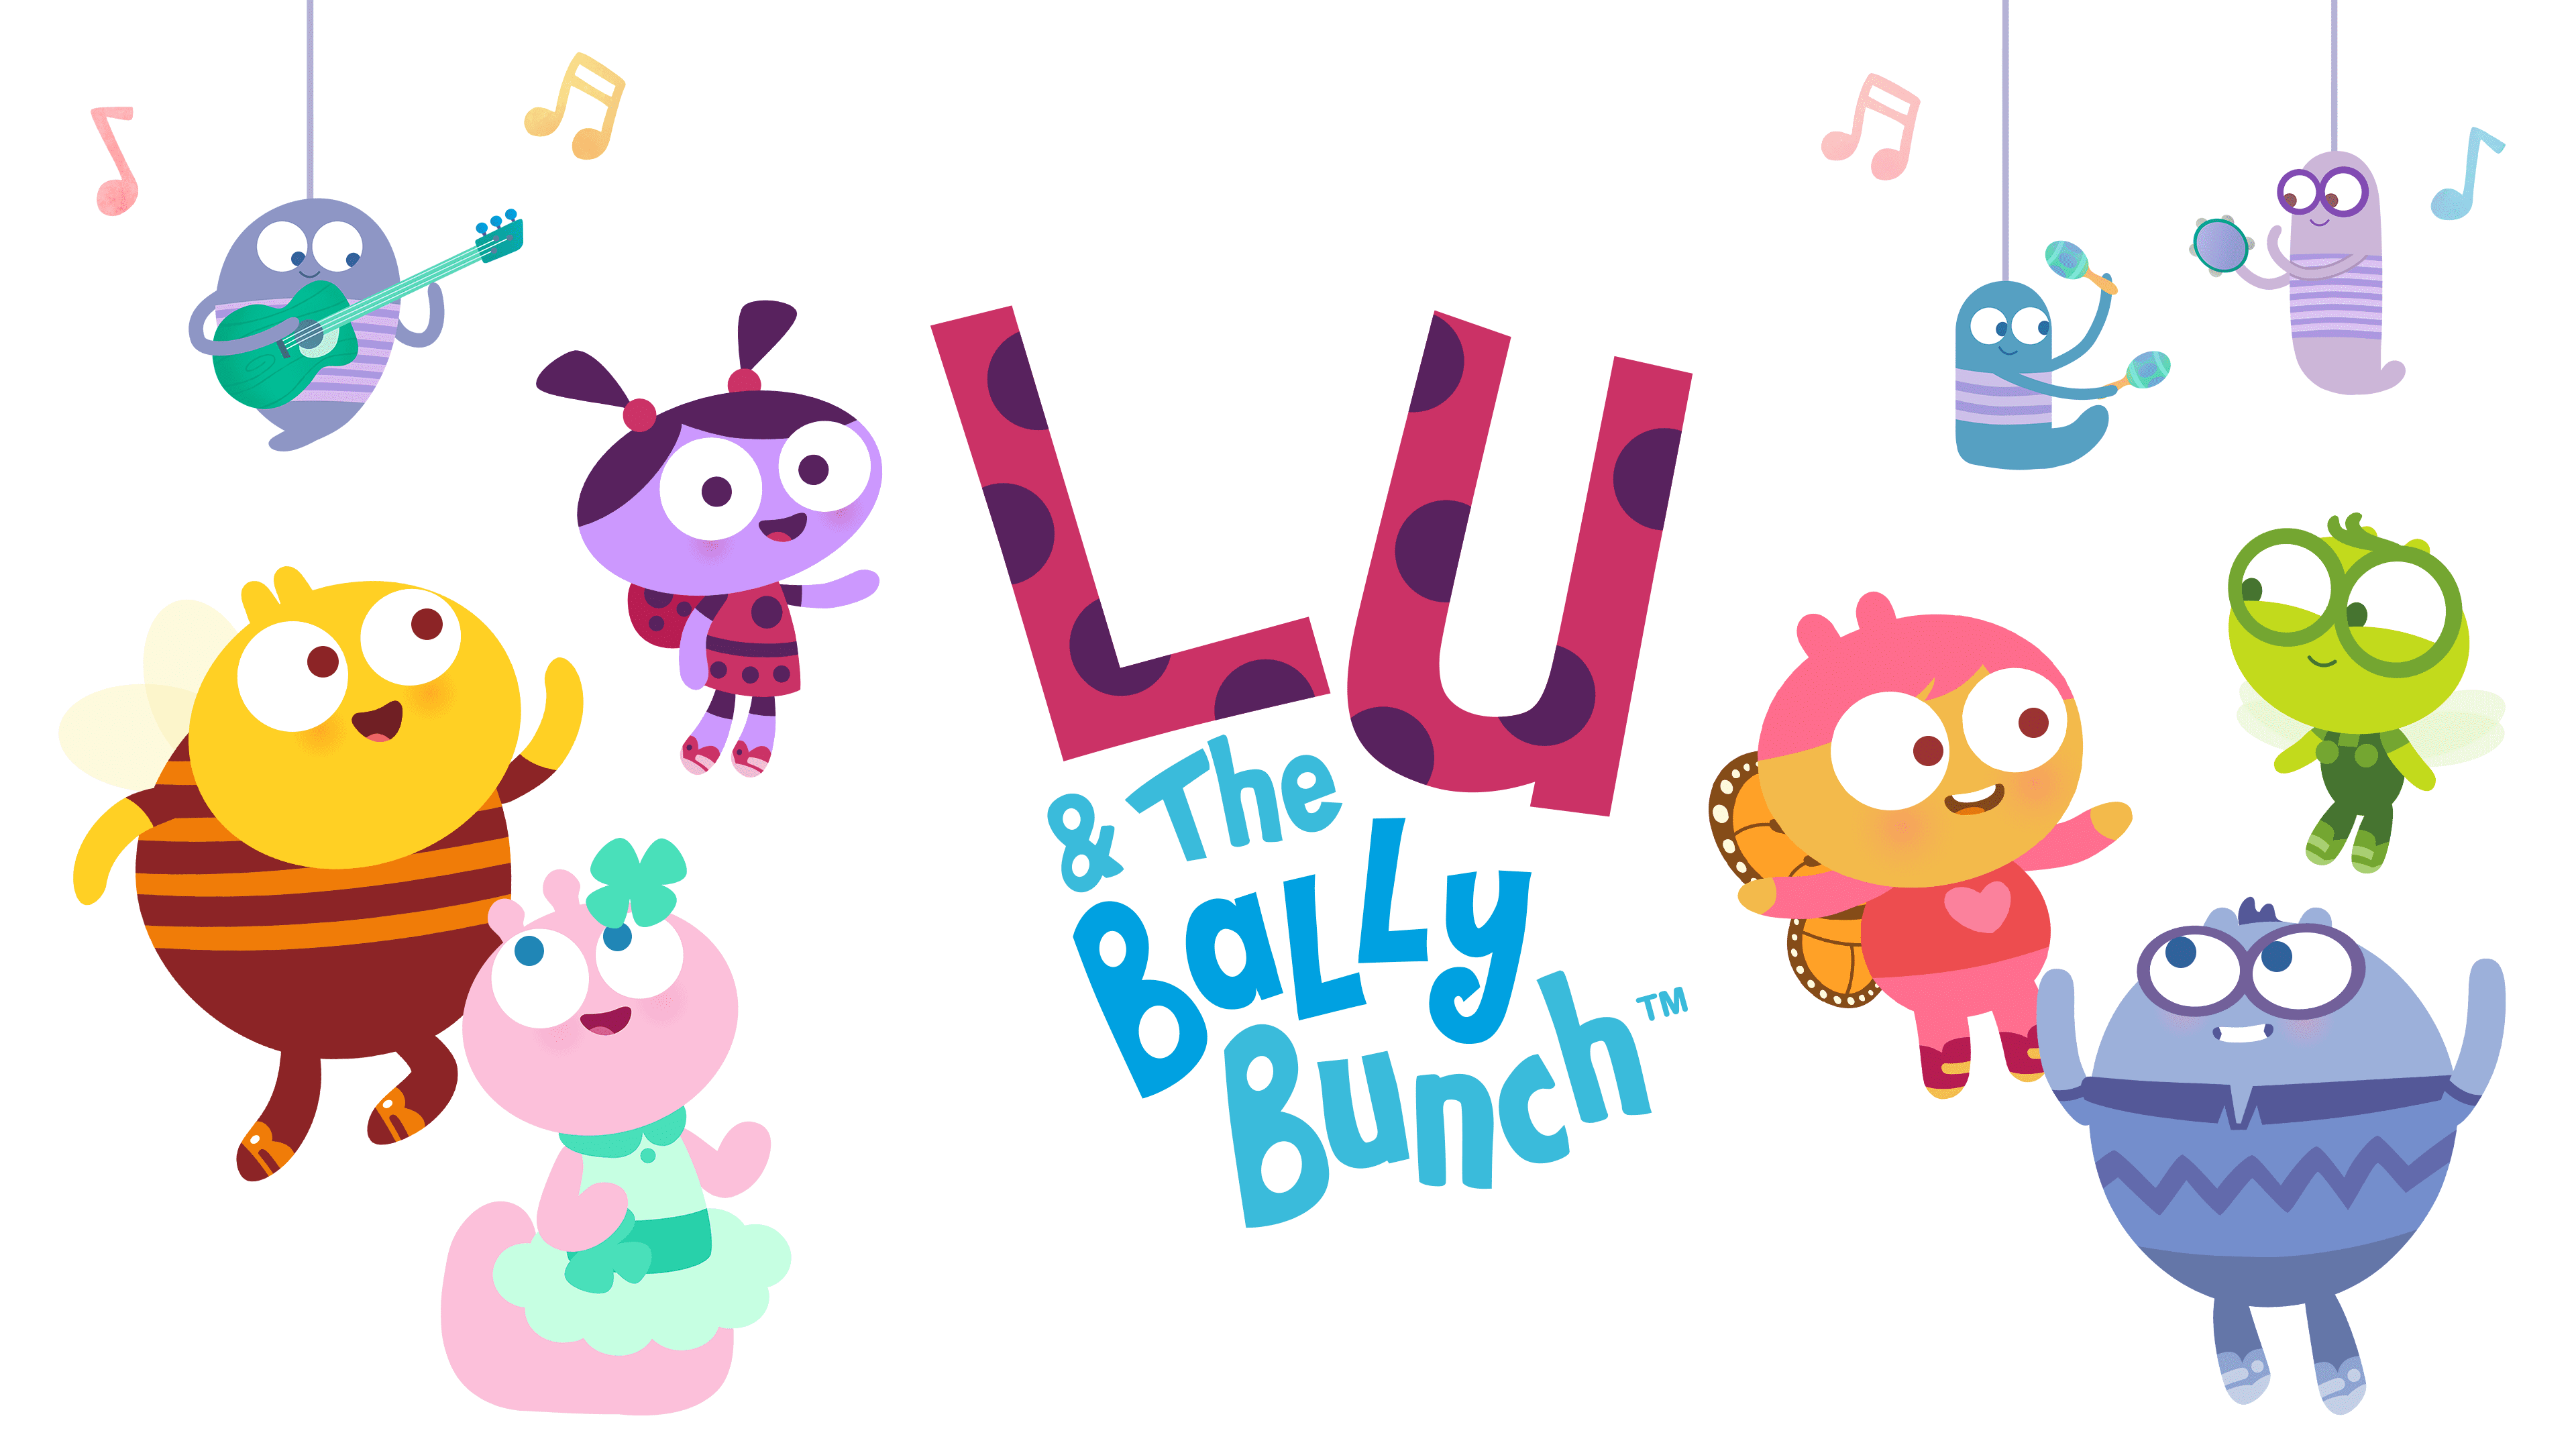 Lu & The Bally Bunch Has Landed! - 9 Story Media Group